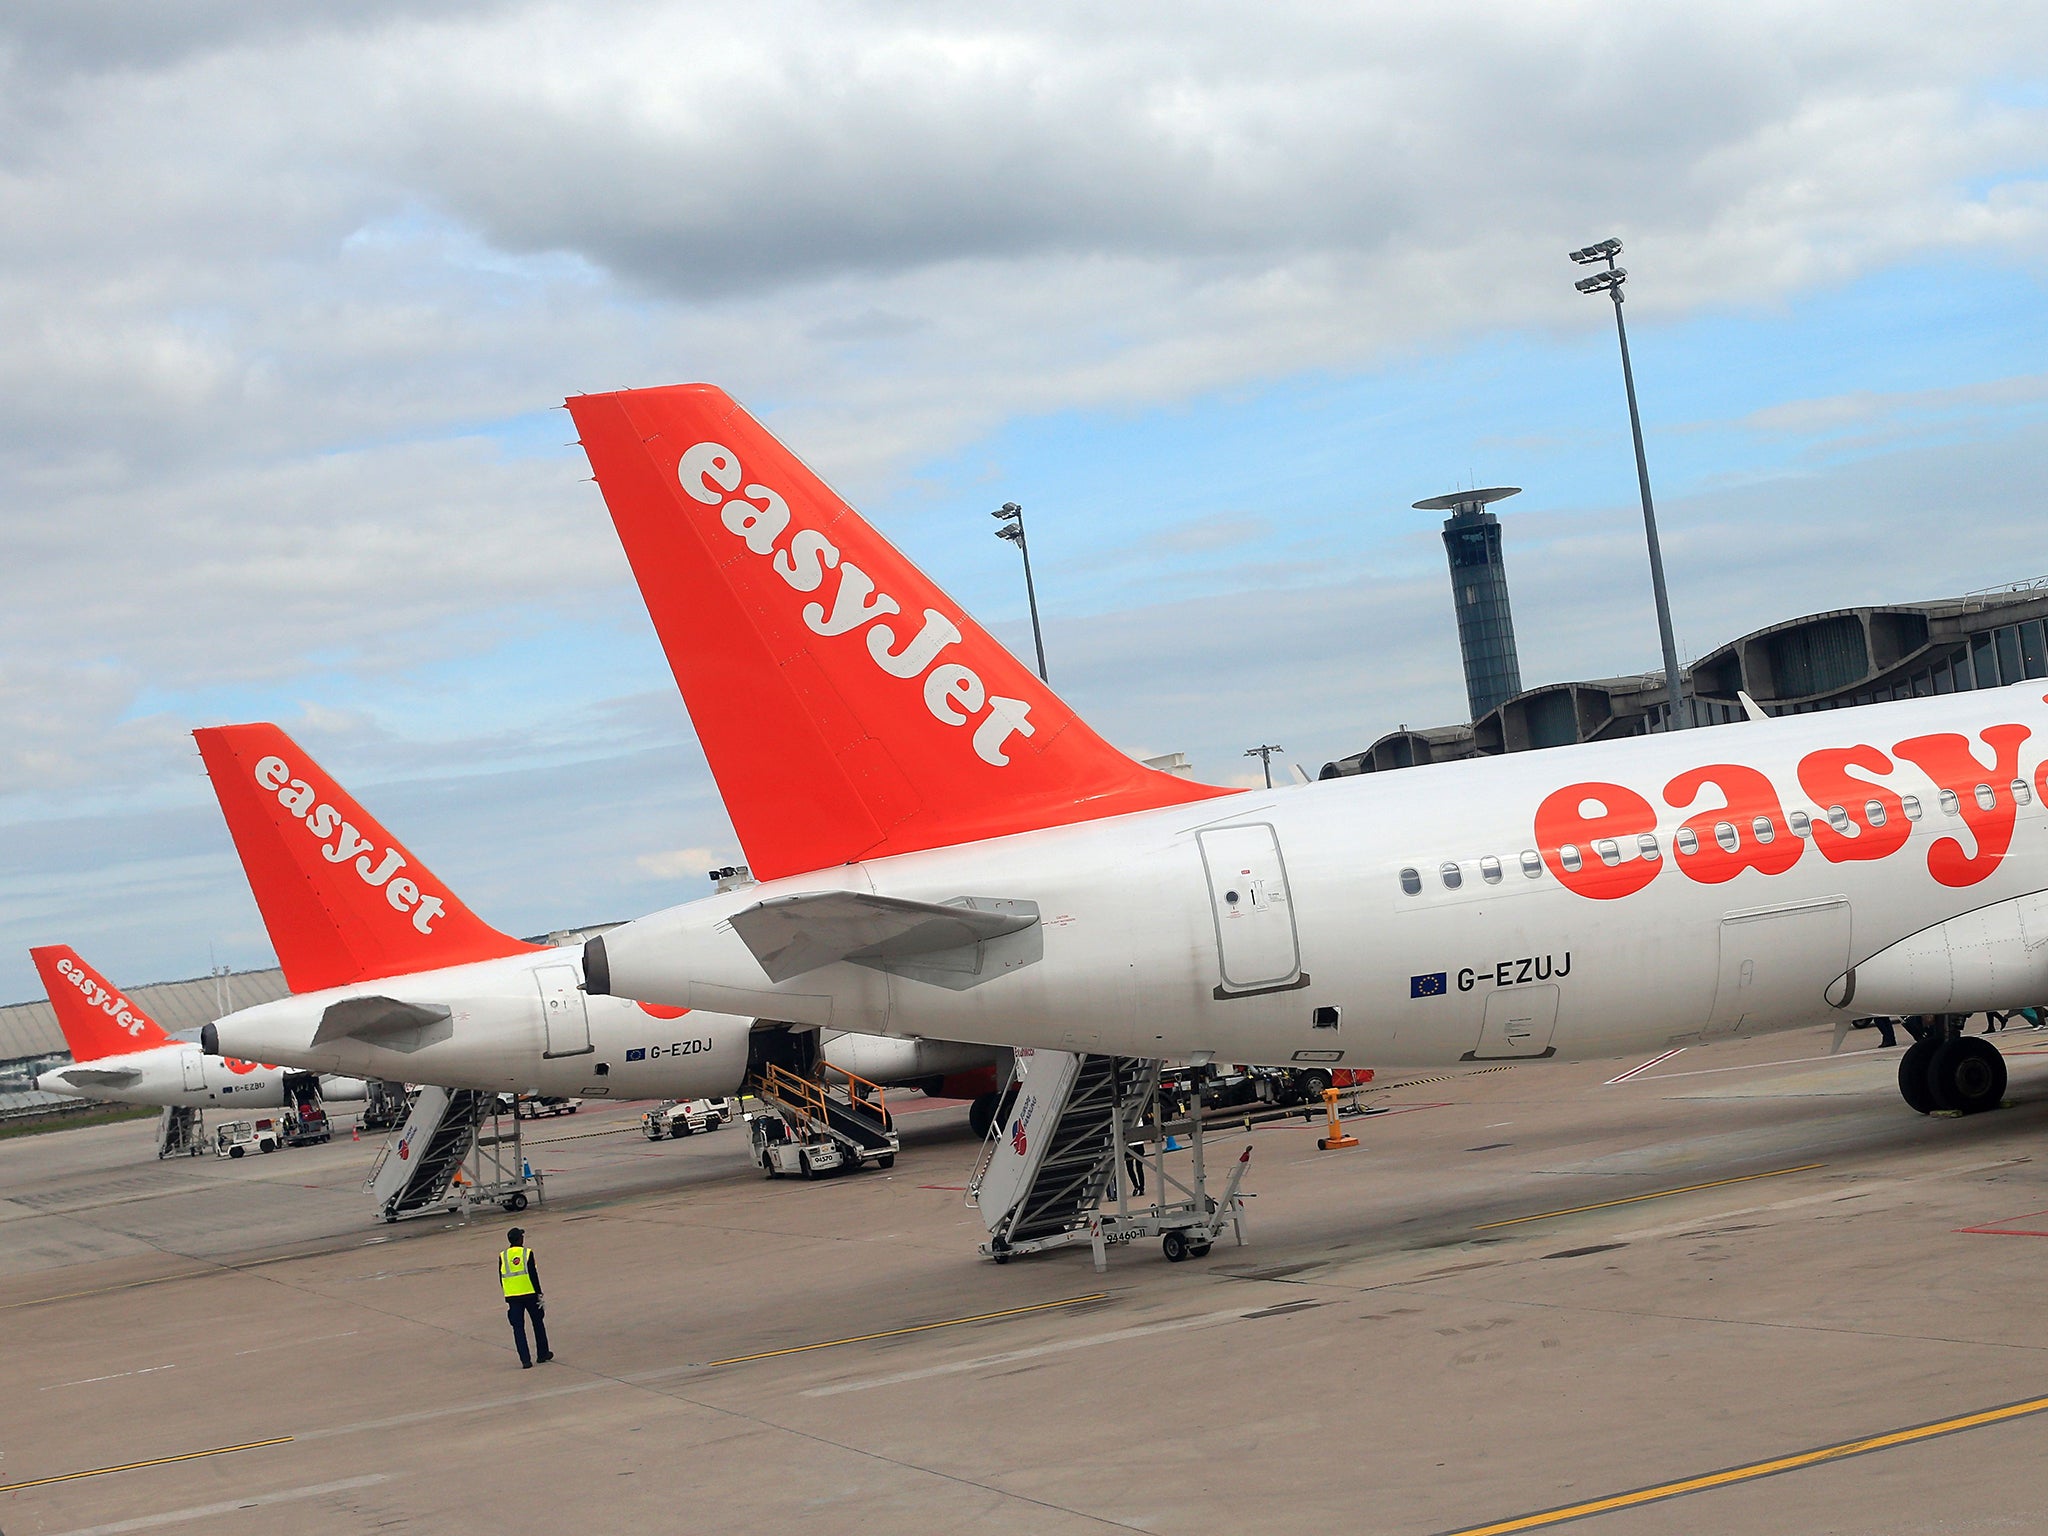 easyJet says its crew correctly identified the young girl on board (Getty)